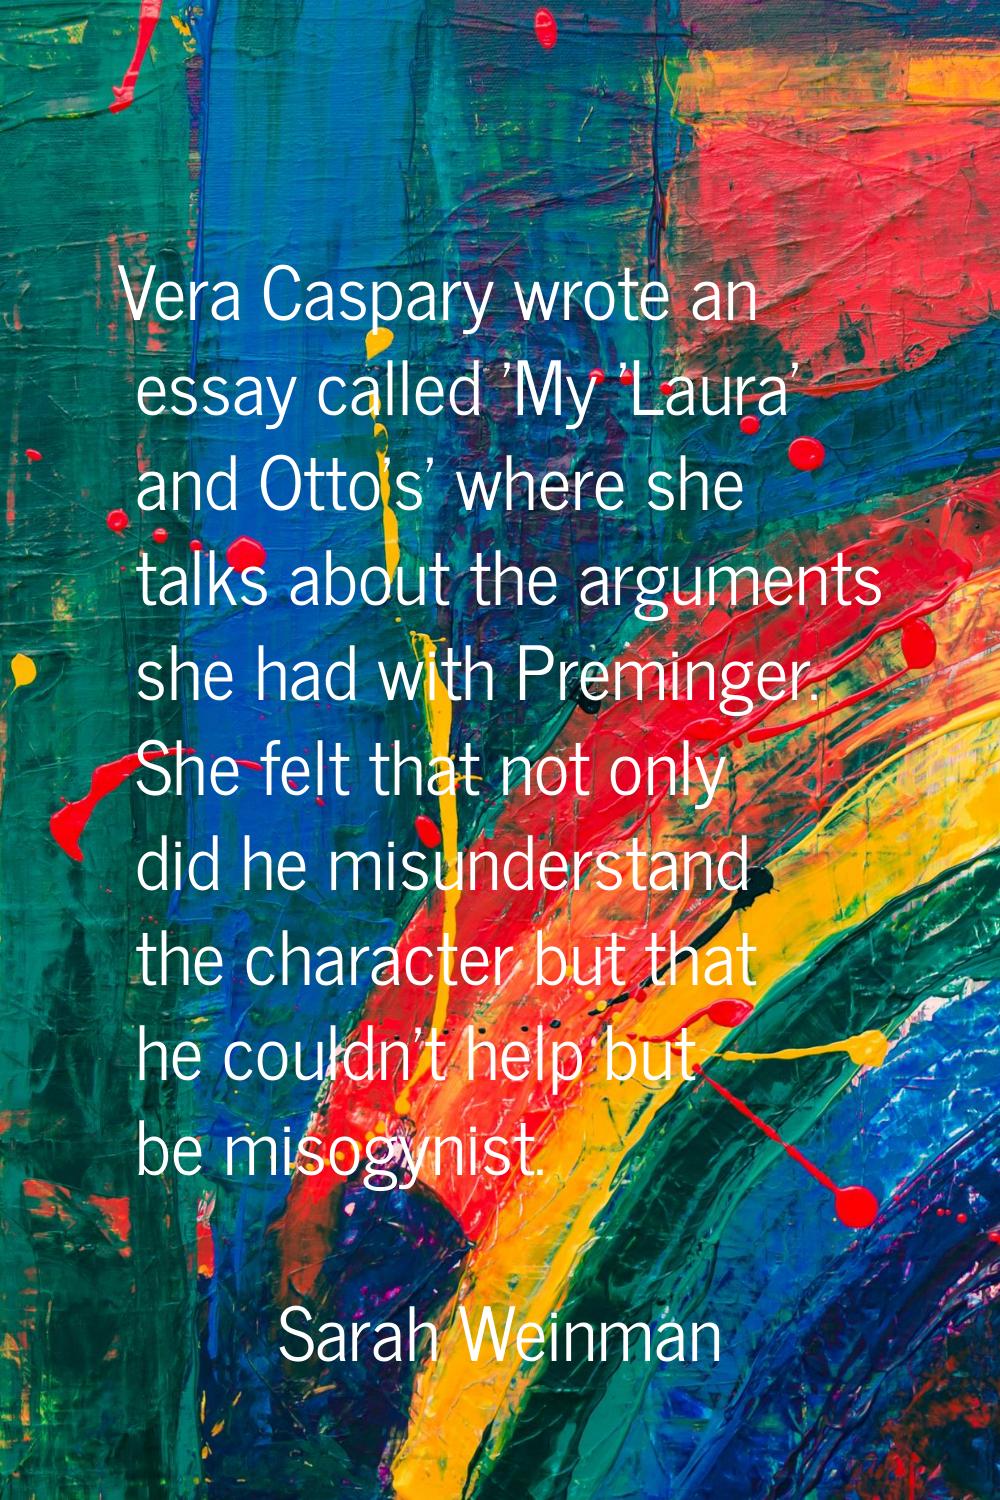 Vera Caspary wrote an essay called 'My 'Laura' and Otto's' where she talks about the arguments she 